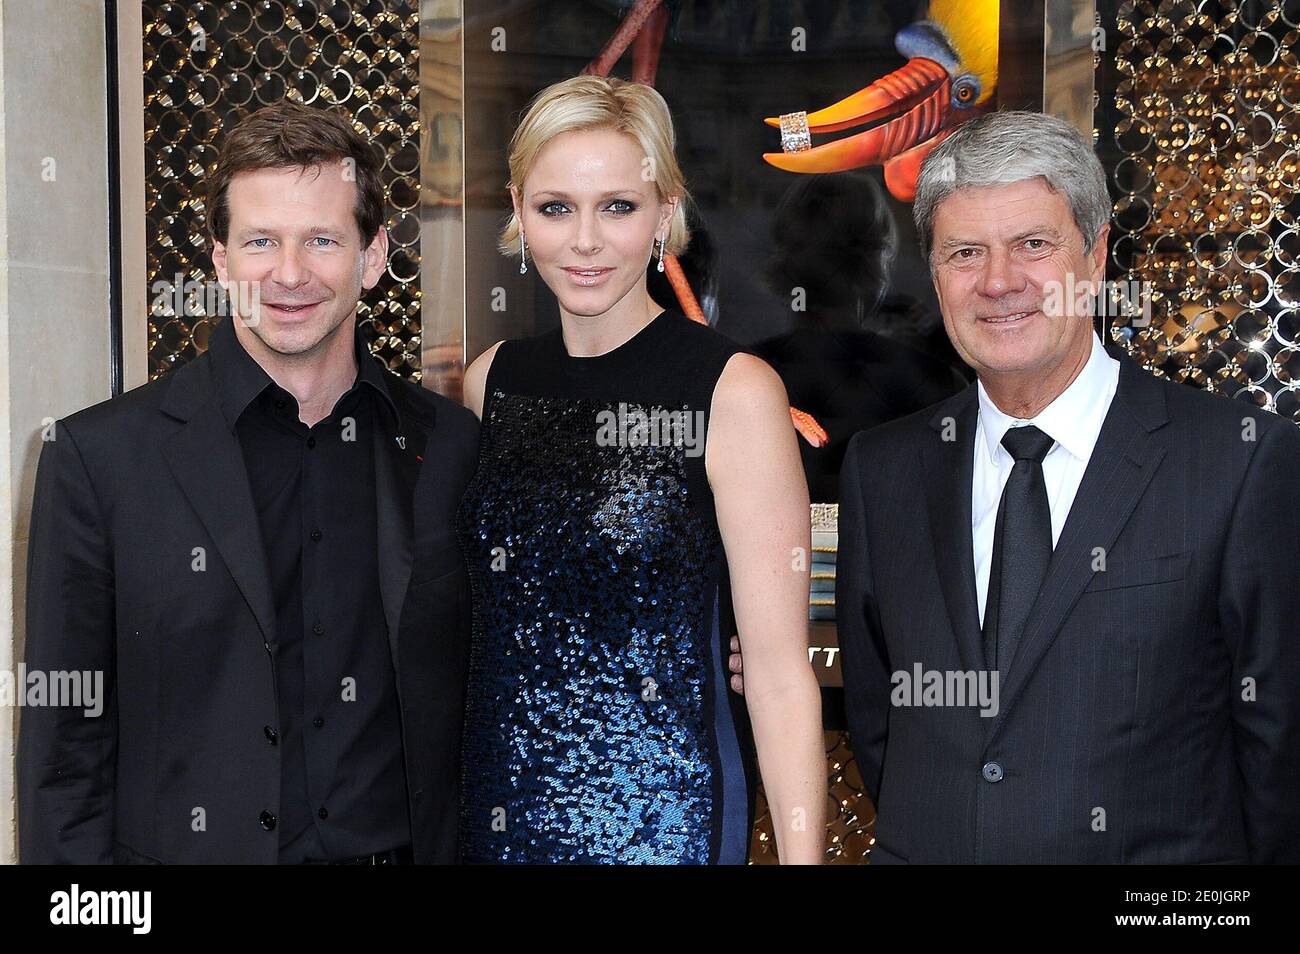 Peter Marino and Yves Carcelle attending the Louis Vuitton new boutique  opening at Place Vendome in Paris, France on July 3, 2012. Photo by Nicolas  Briquet/ABACAPRESS.COM Stock Photo - Alamy